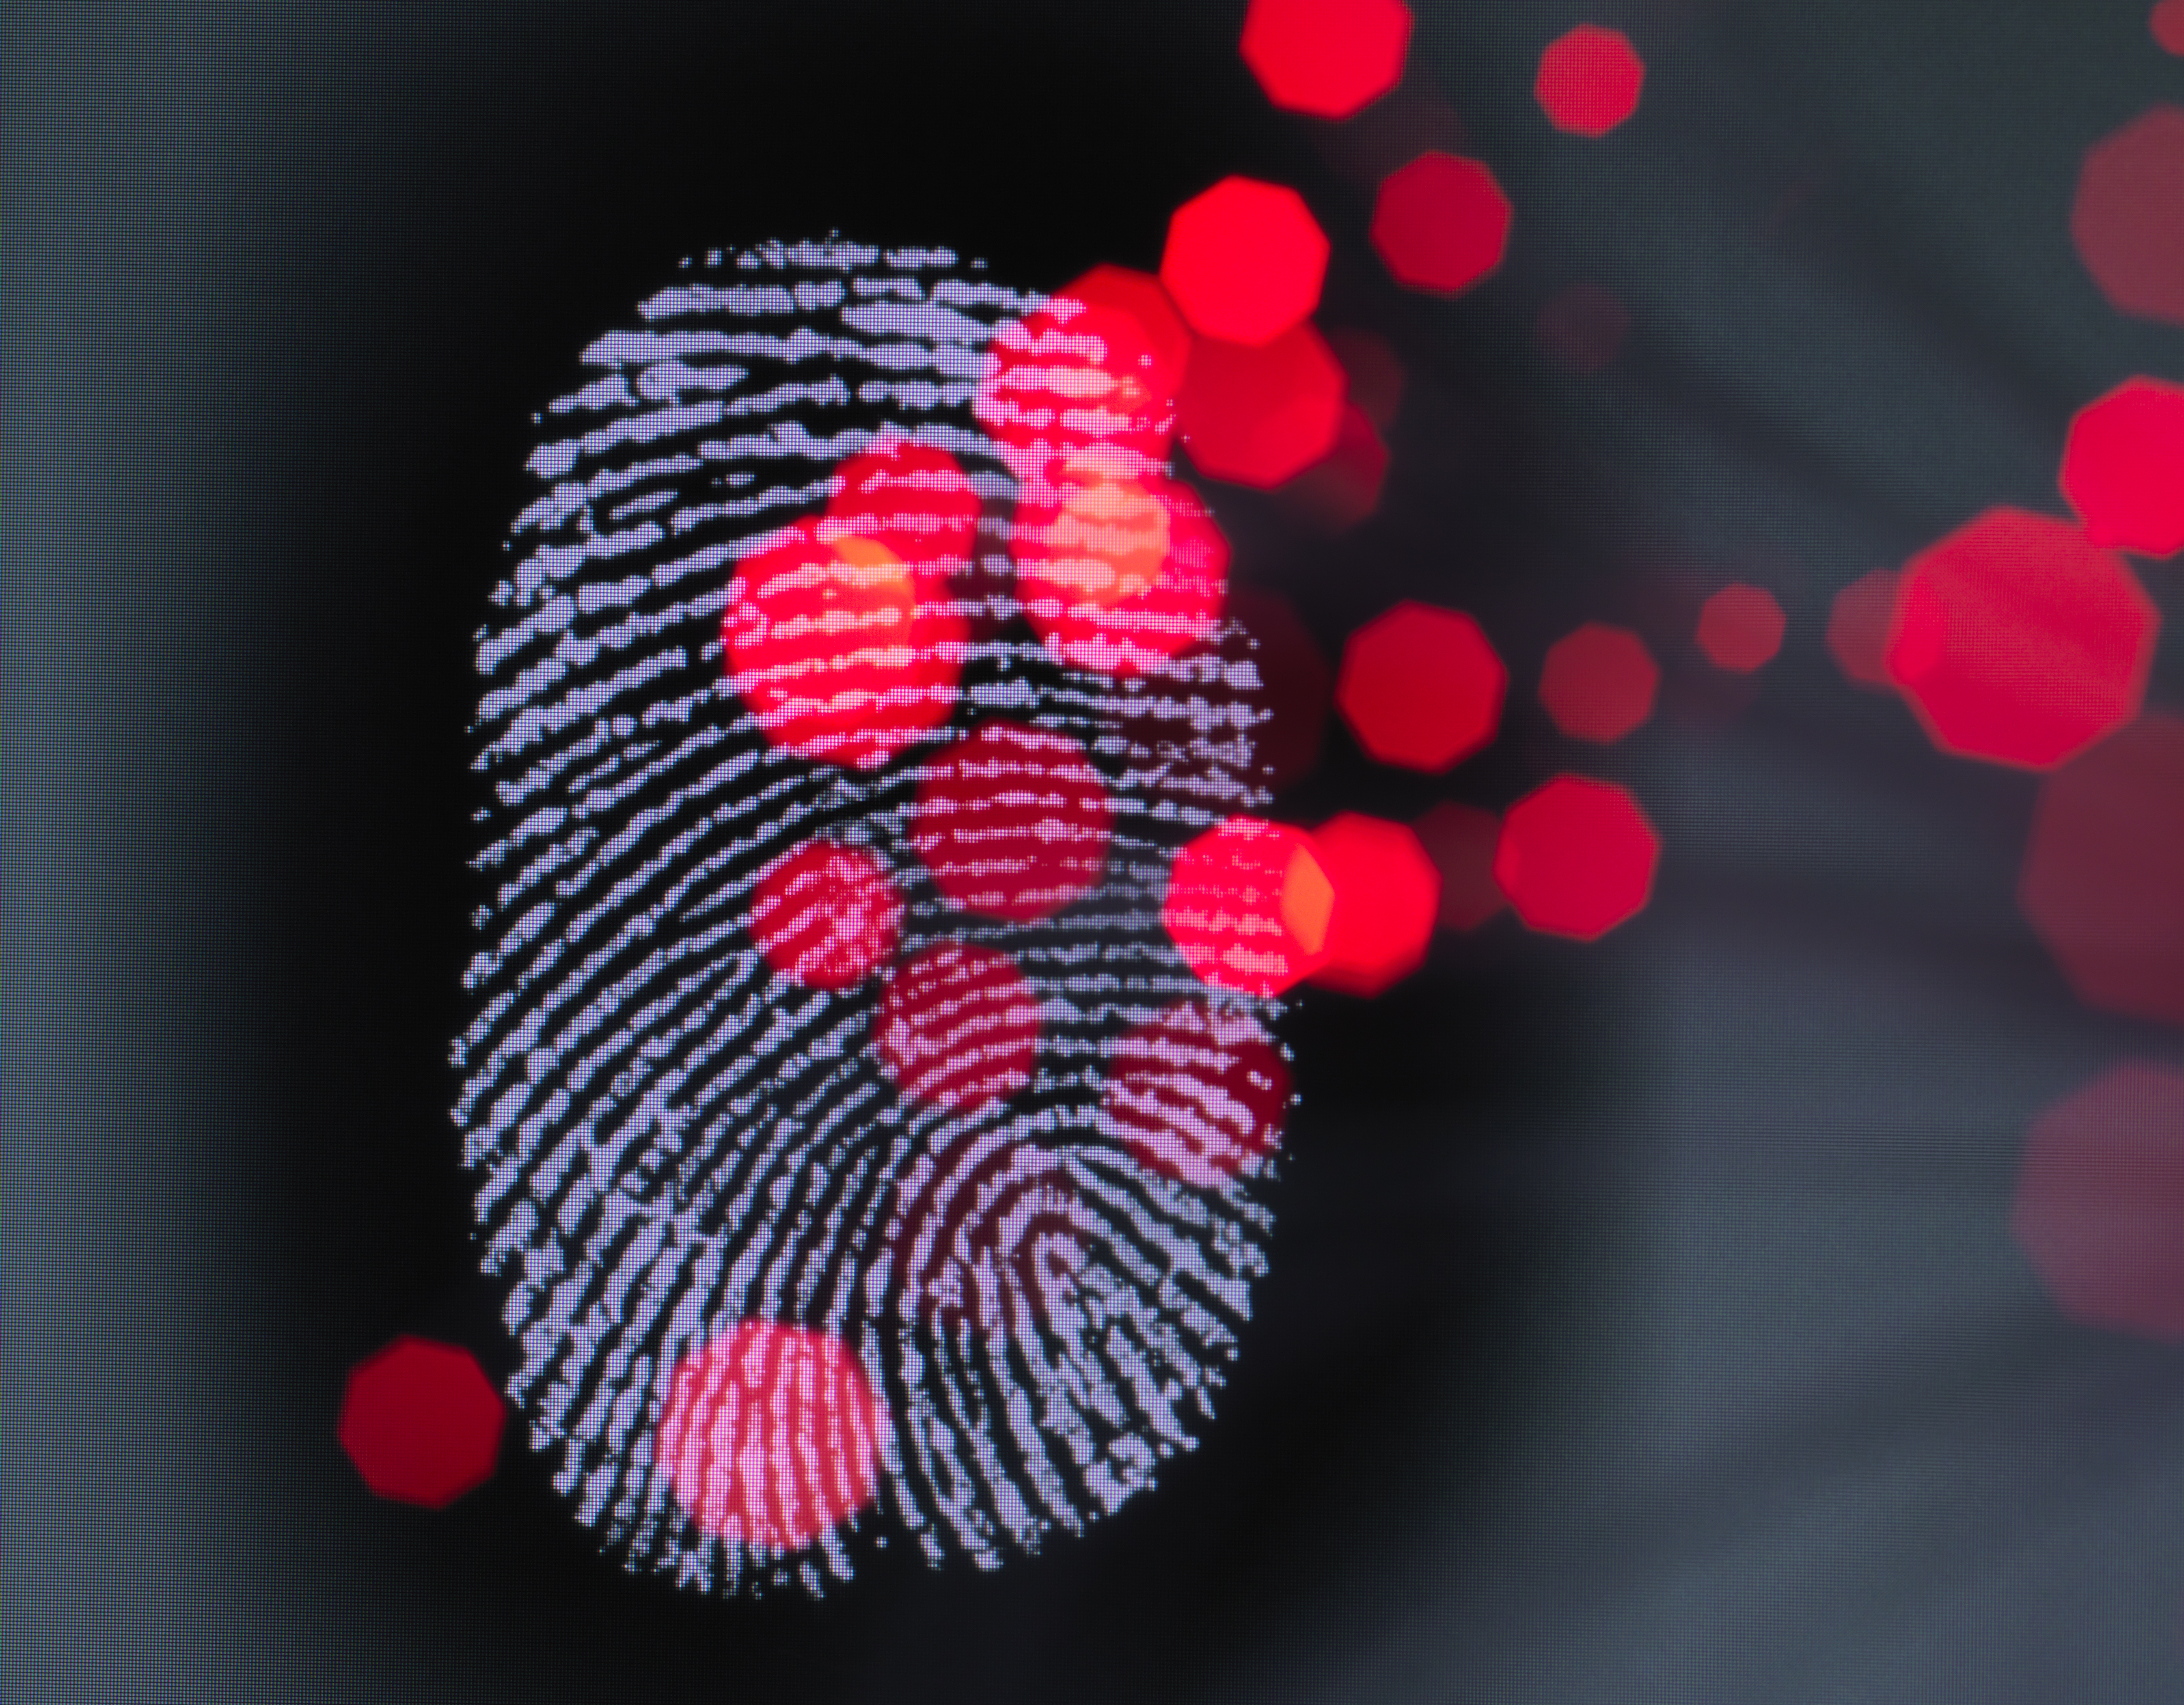 a finger print identity on a screen